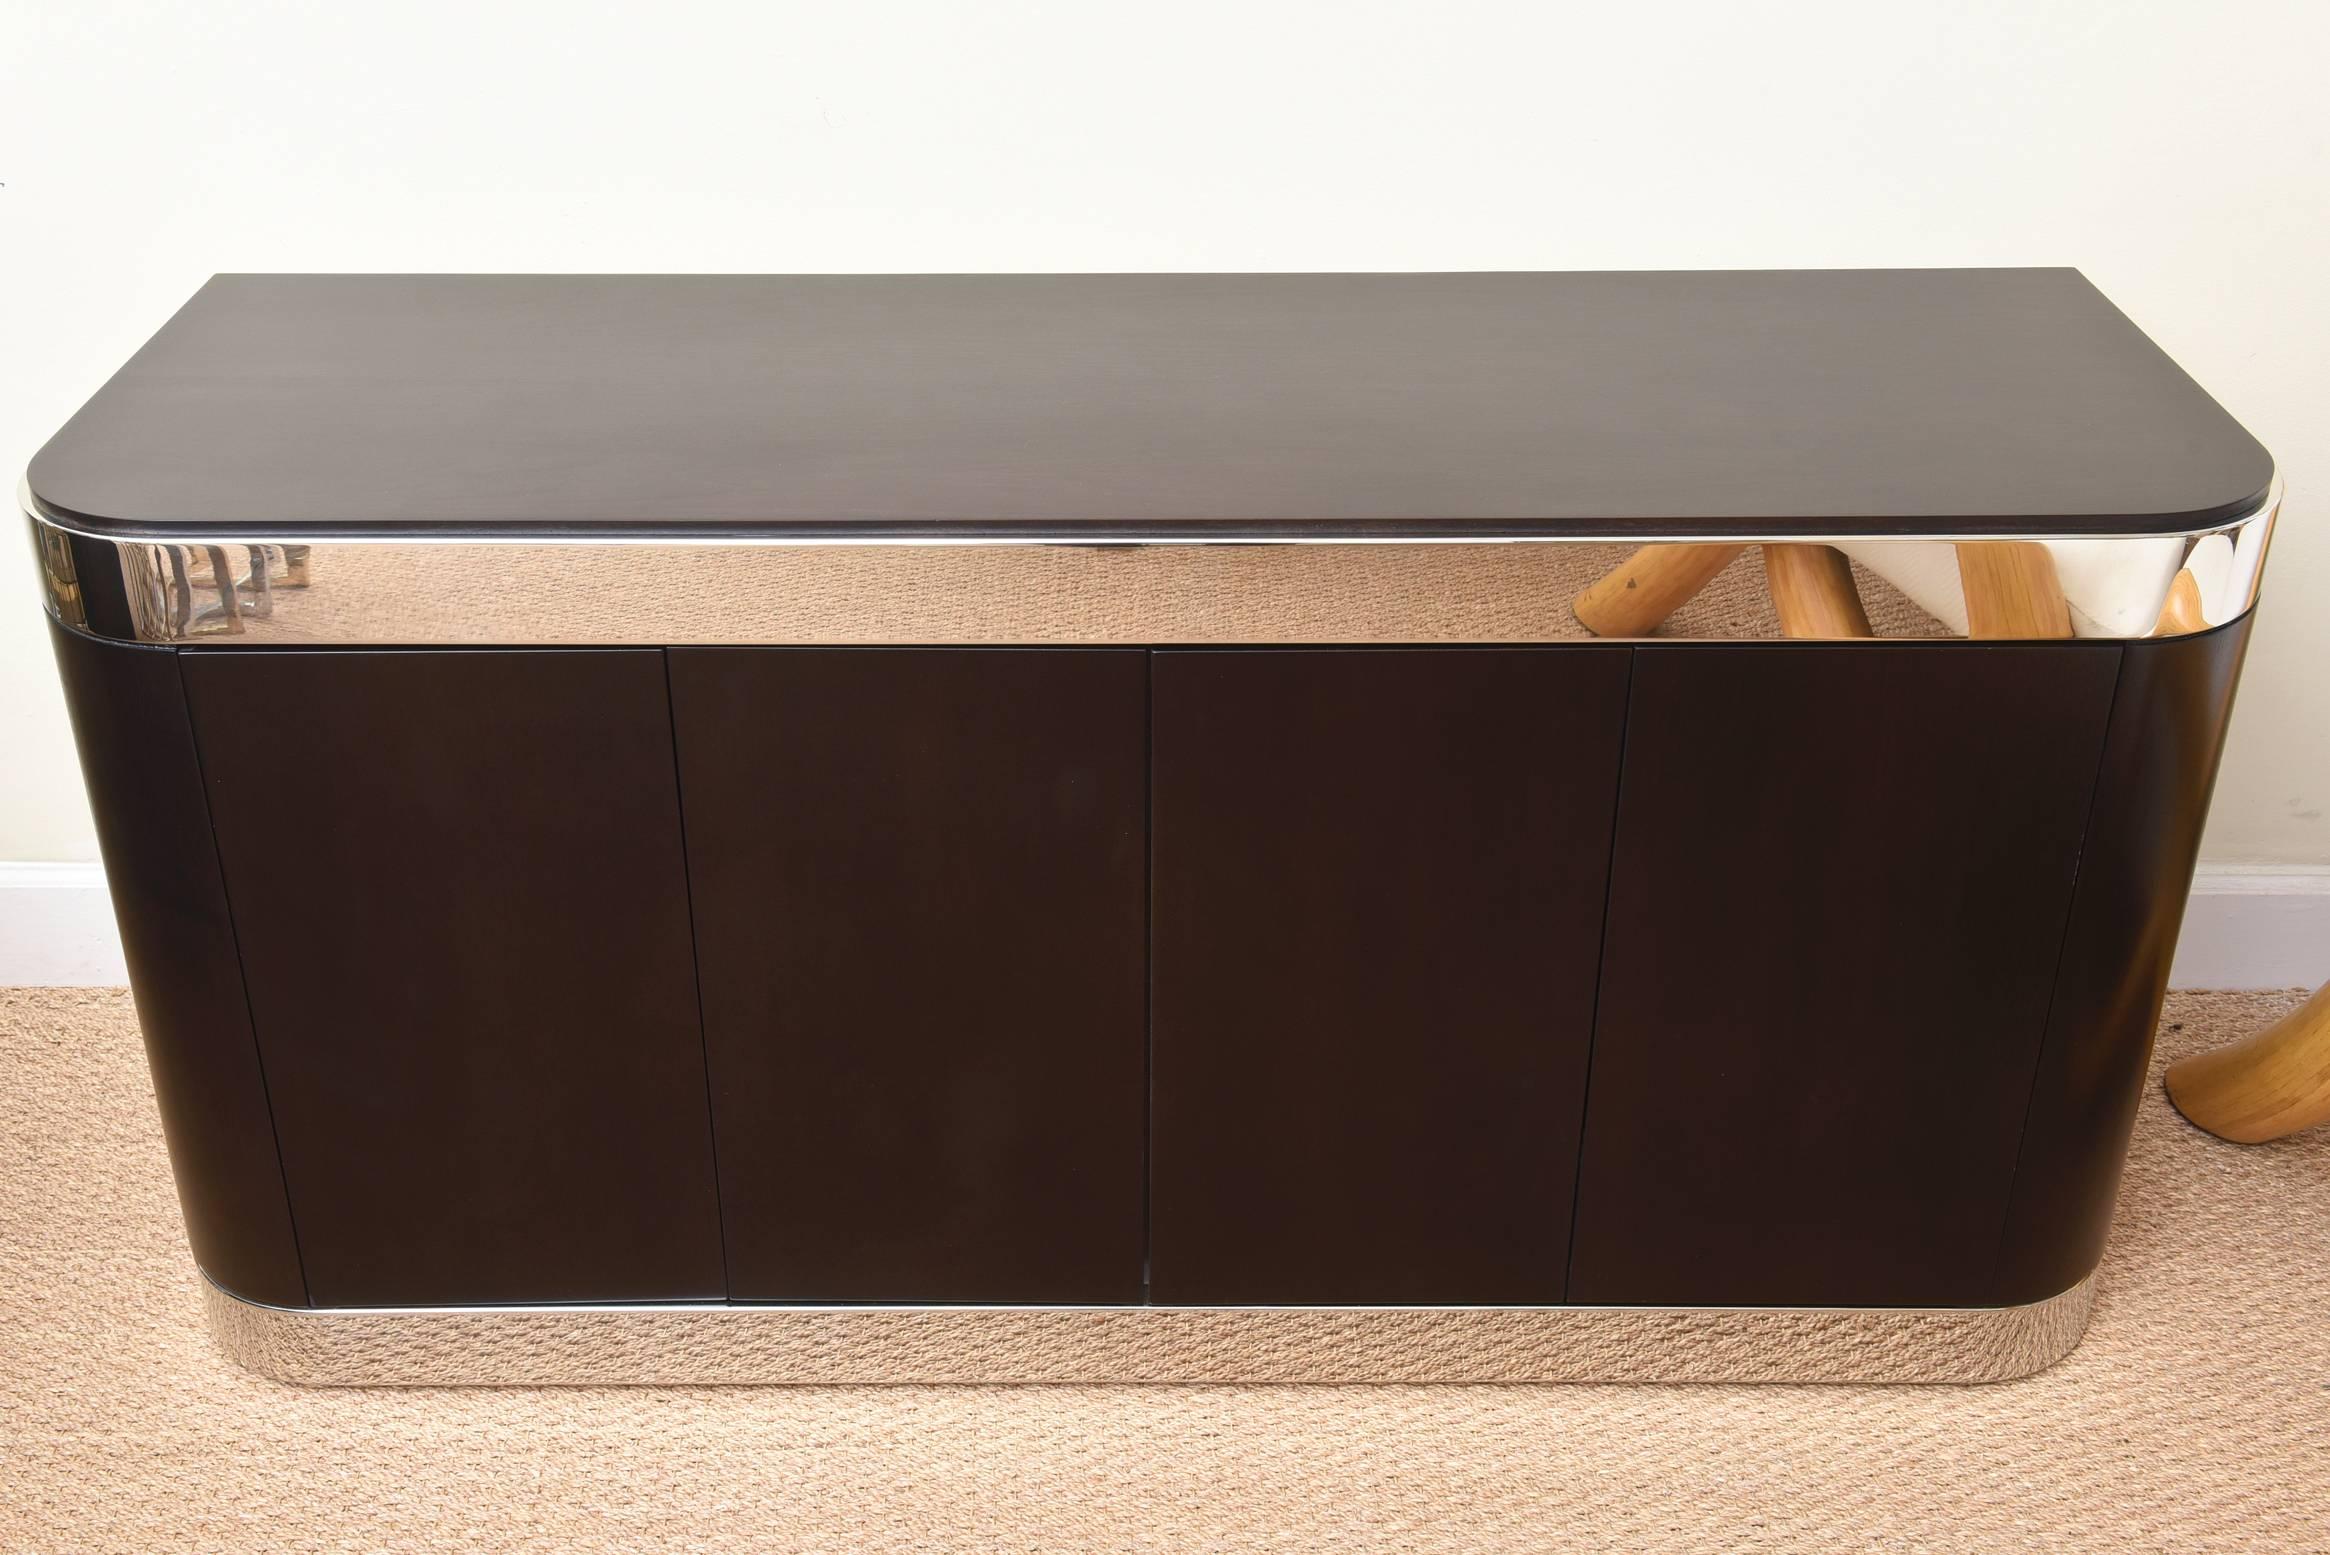 The radius corners of this fabulous Leon Rosen for Pace cabinet has handsome appointments and lines to it. The mahogany wood has been ebonized and the stainless steel banding has been polished professionally. All of the interior also has been